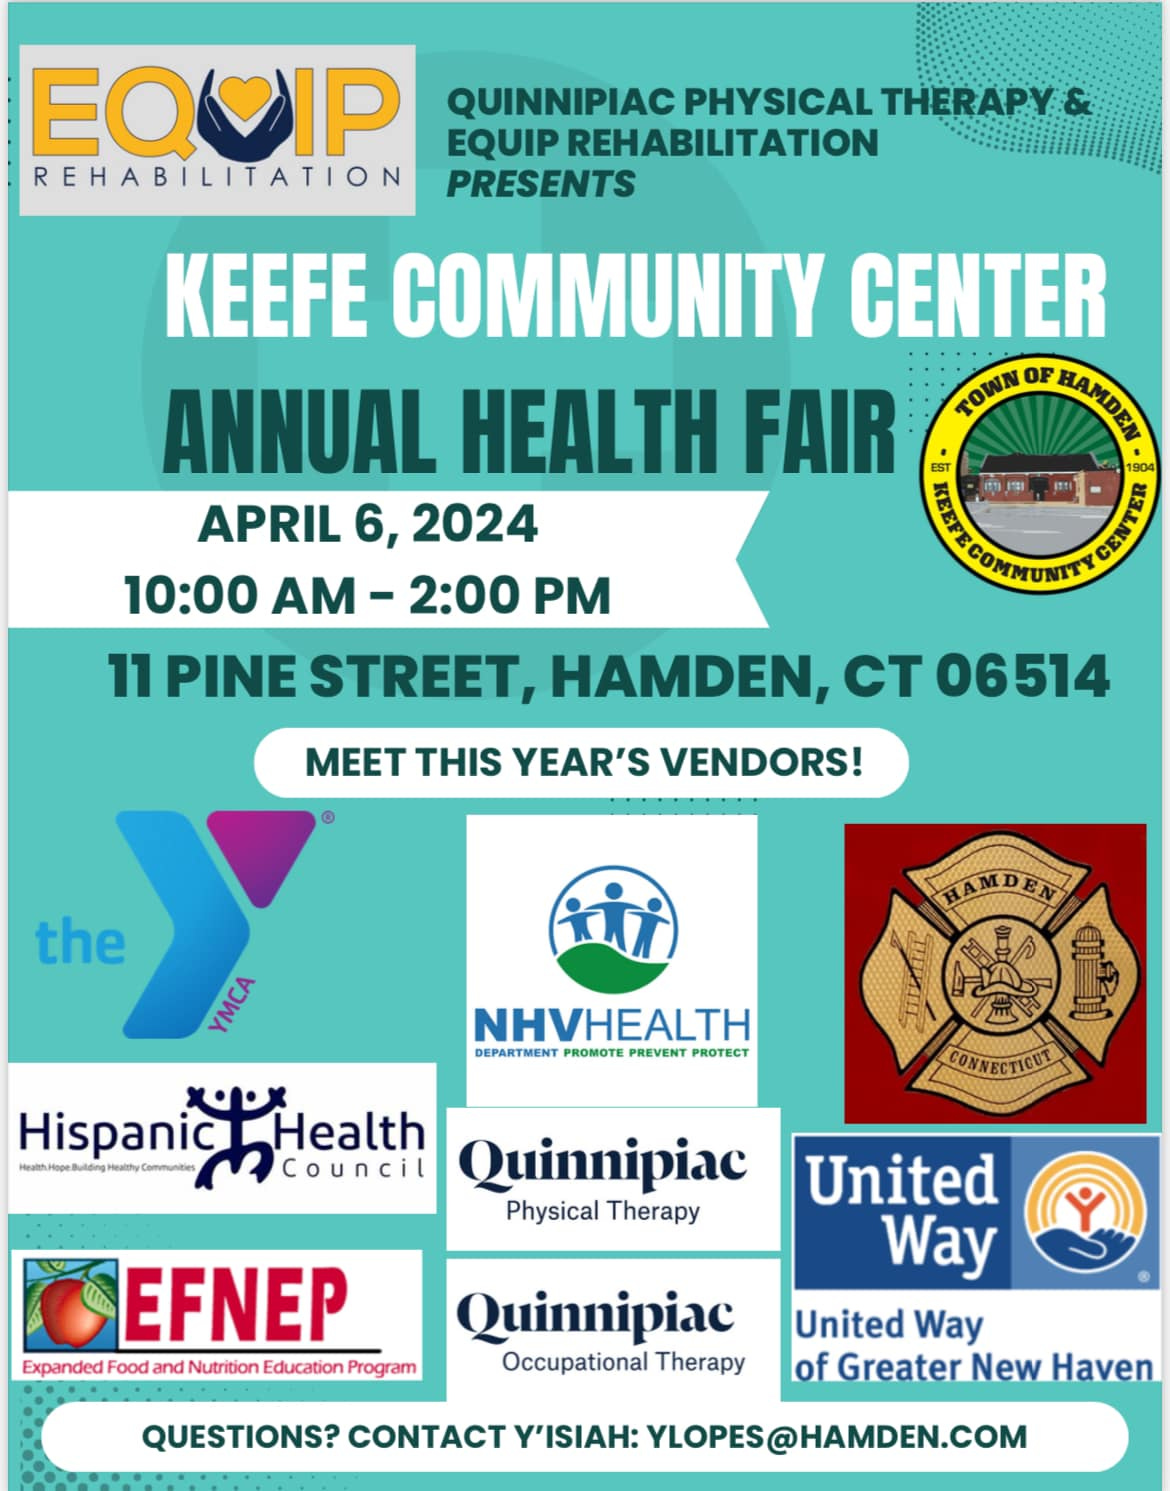 May be an image of ‎text that says '‎EQUIP QUINNIPIAC PHYSICAL THERAPY& EQUIP REHABILITATION EHABILITATION PRESENTS KEEFE COMMUNITY CENTER ANNUAL HEALTH FAIR TOWN OF BAMDER APRIL 6, 2024 10:00 AM- 2:00 PM மி்ப்ப்ா 11 PINE STREET, HAMDEN, CT 06514 MEET THIS YEAR'S VENDORS! the YACA NHVHEALTH DEPARTMENT ROMOTE PREVENT ROTECT Hispanic xdنX Health Mcouncil Quinnipiac Physical Therapy EFNEP Expanded ood and Nutrition Education Program Quinnipiac Occupational Therapy United Way United Way of Greater New Haven QUESTIONS? CONTACT Y'ISIAH: YLOPES@HAMDEN.COM‎'‎